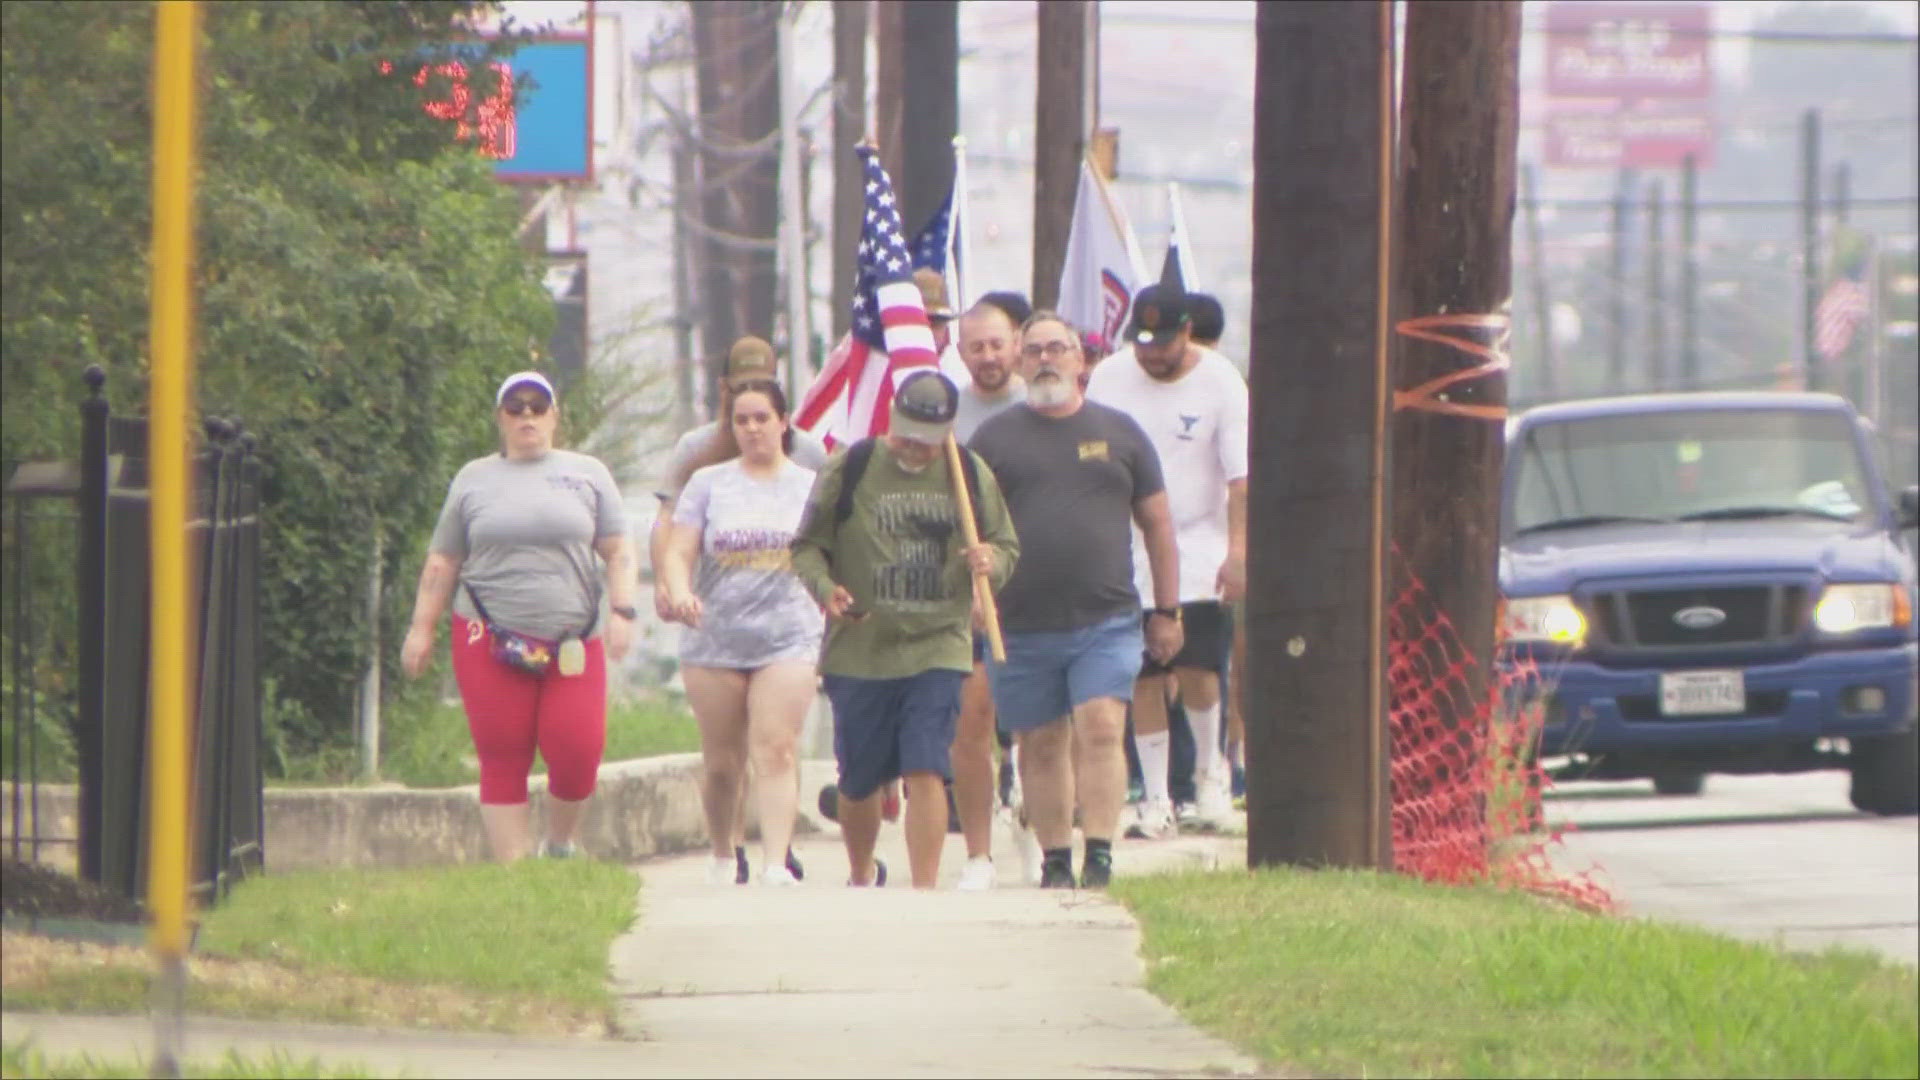 Carry the Load started in 2011 and the group's mission is to "restore the true meaning of memorial day."